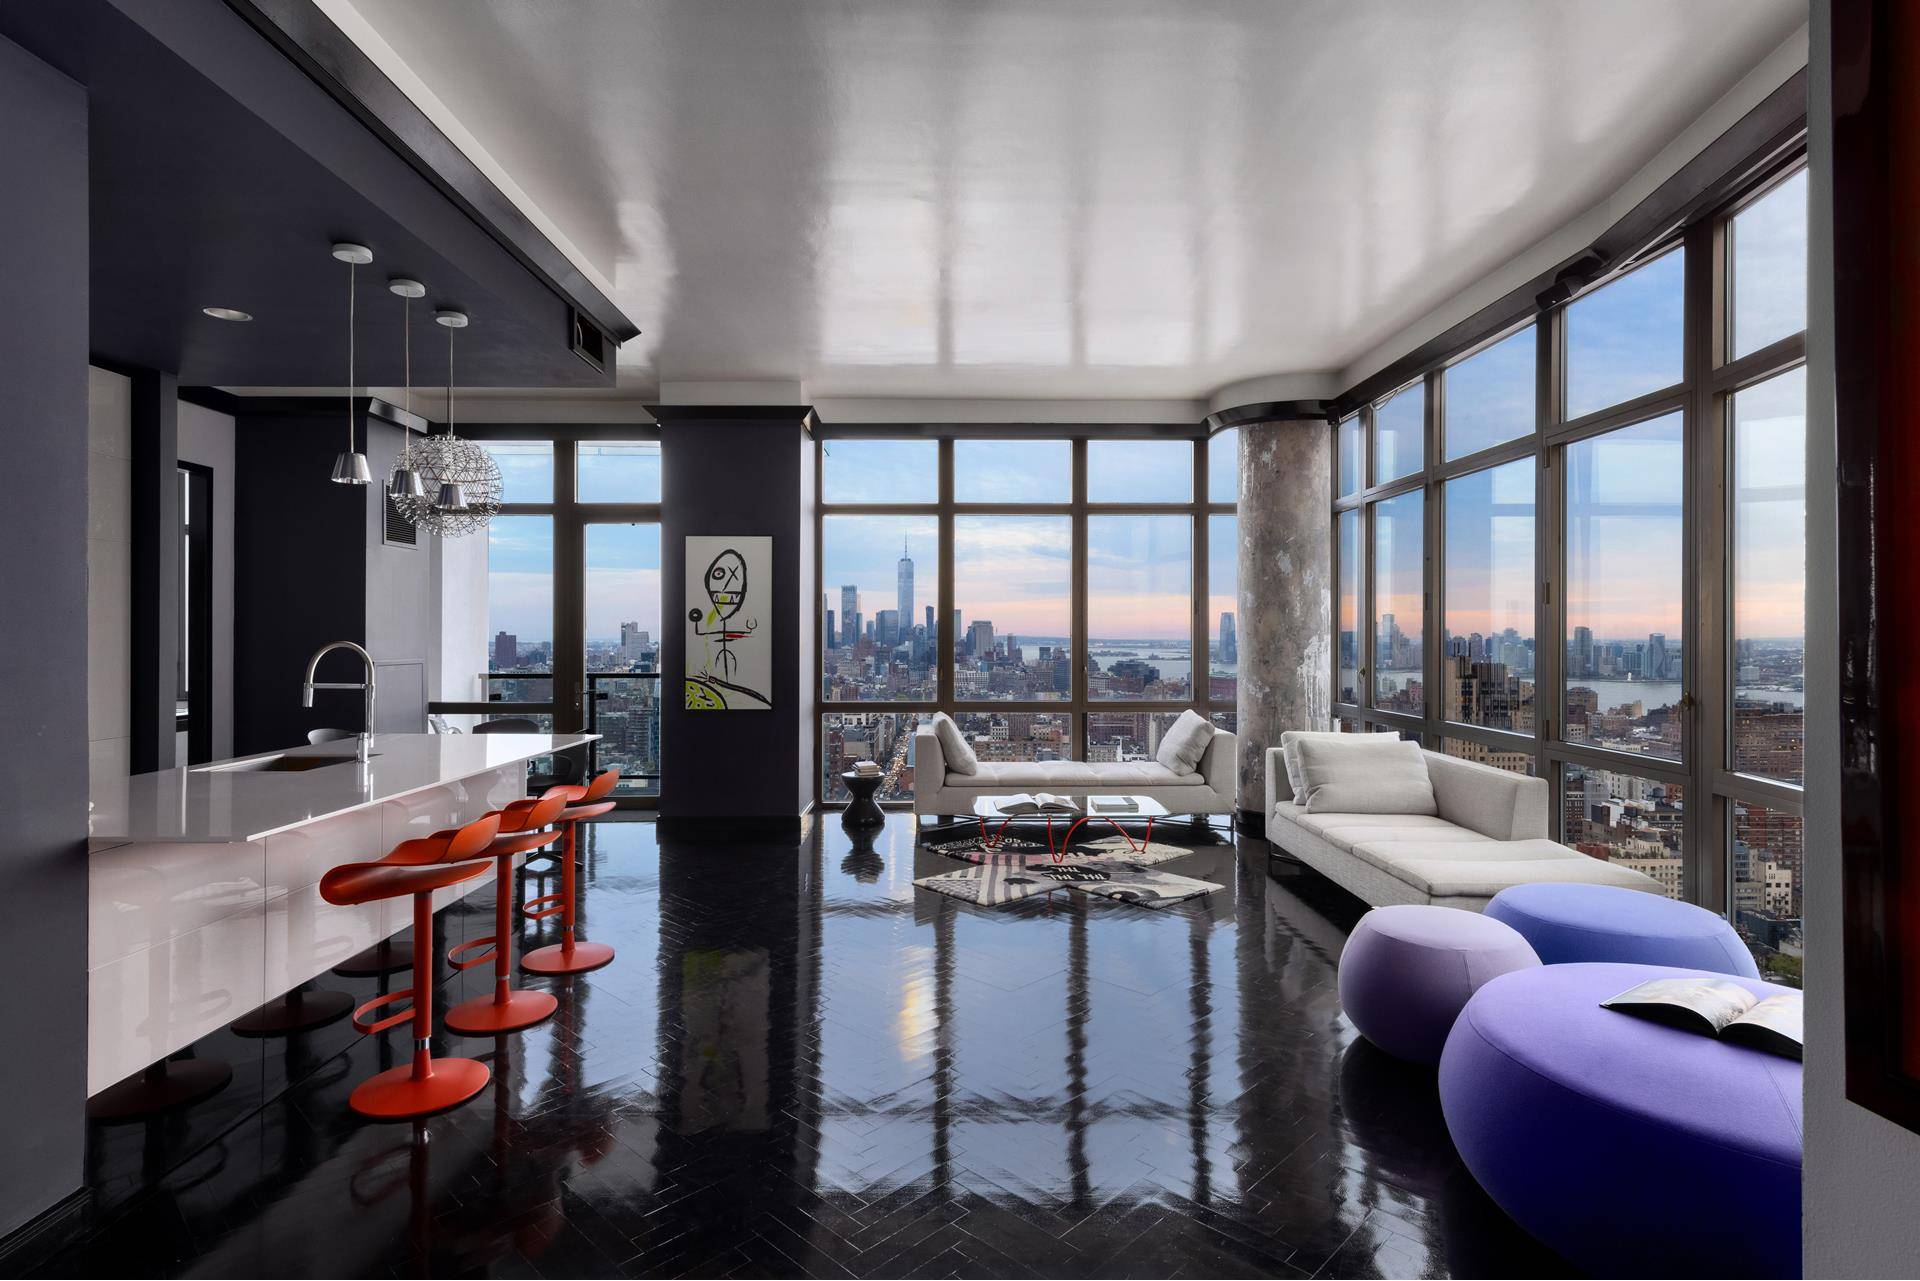 These spectacular panoramic views of New York City could be yours in this sun drenched penthouse in one of Chelsea's premiere luxury condominiums.